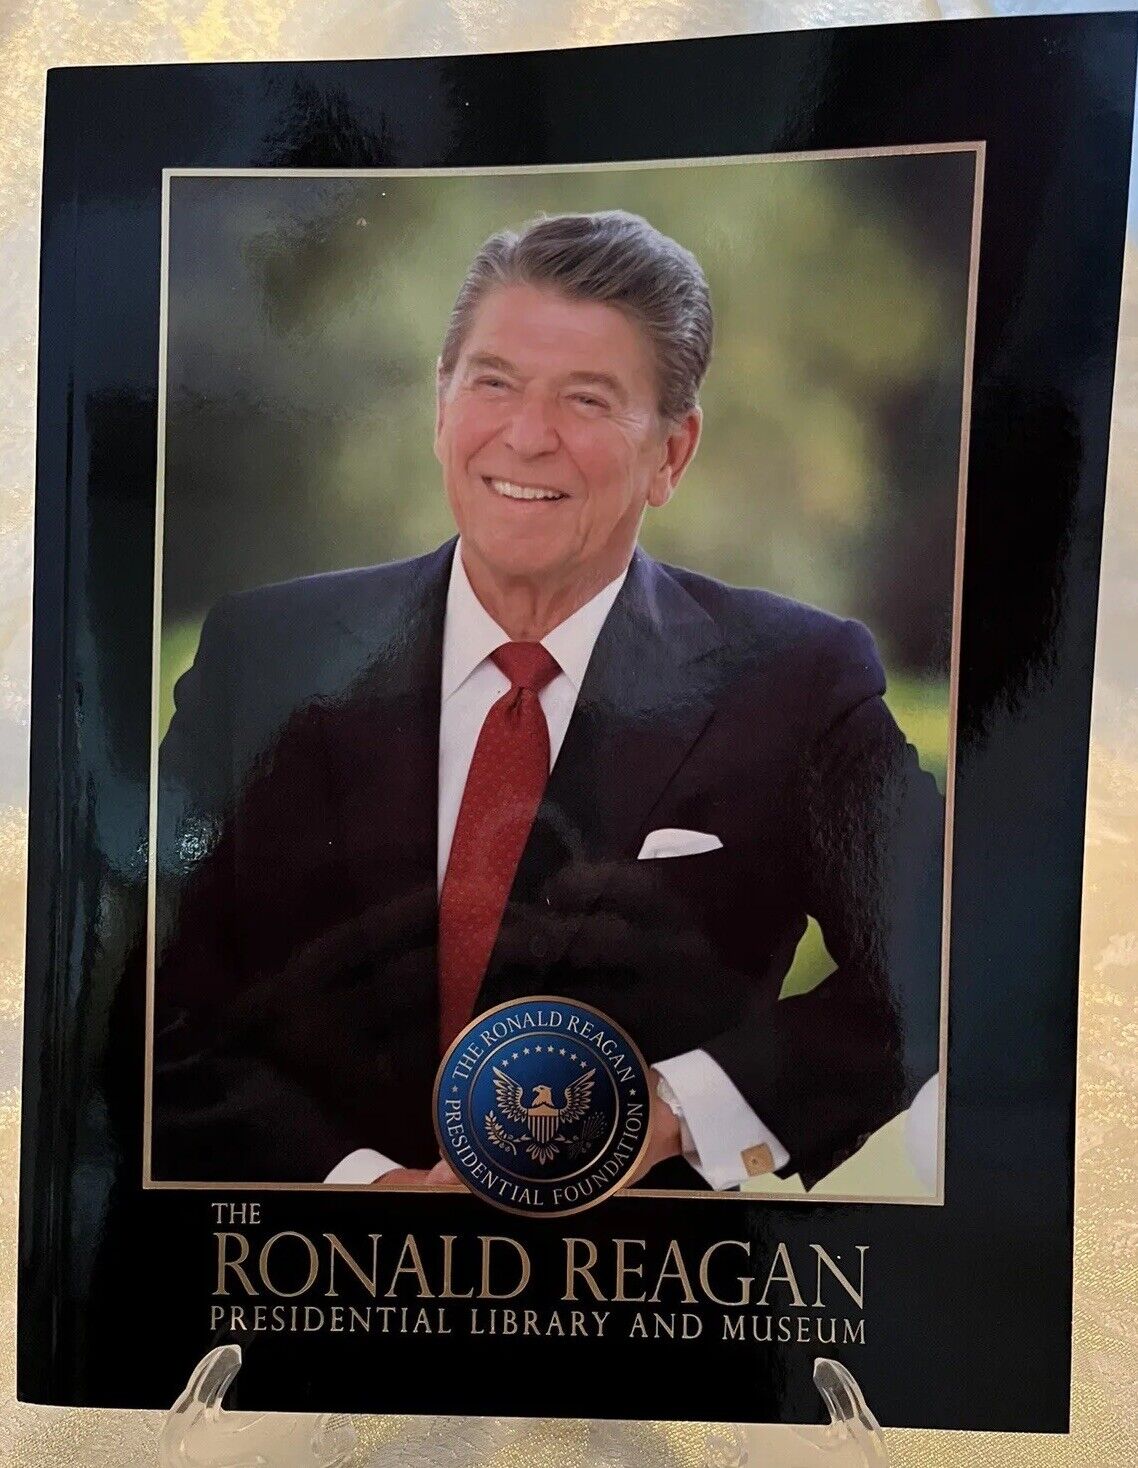 The Ronald Reagan Presidential Library and Museum Book